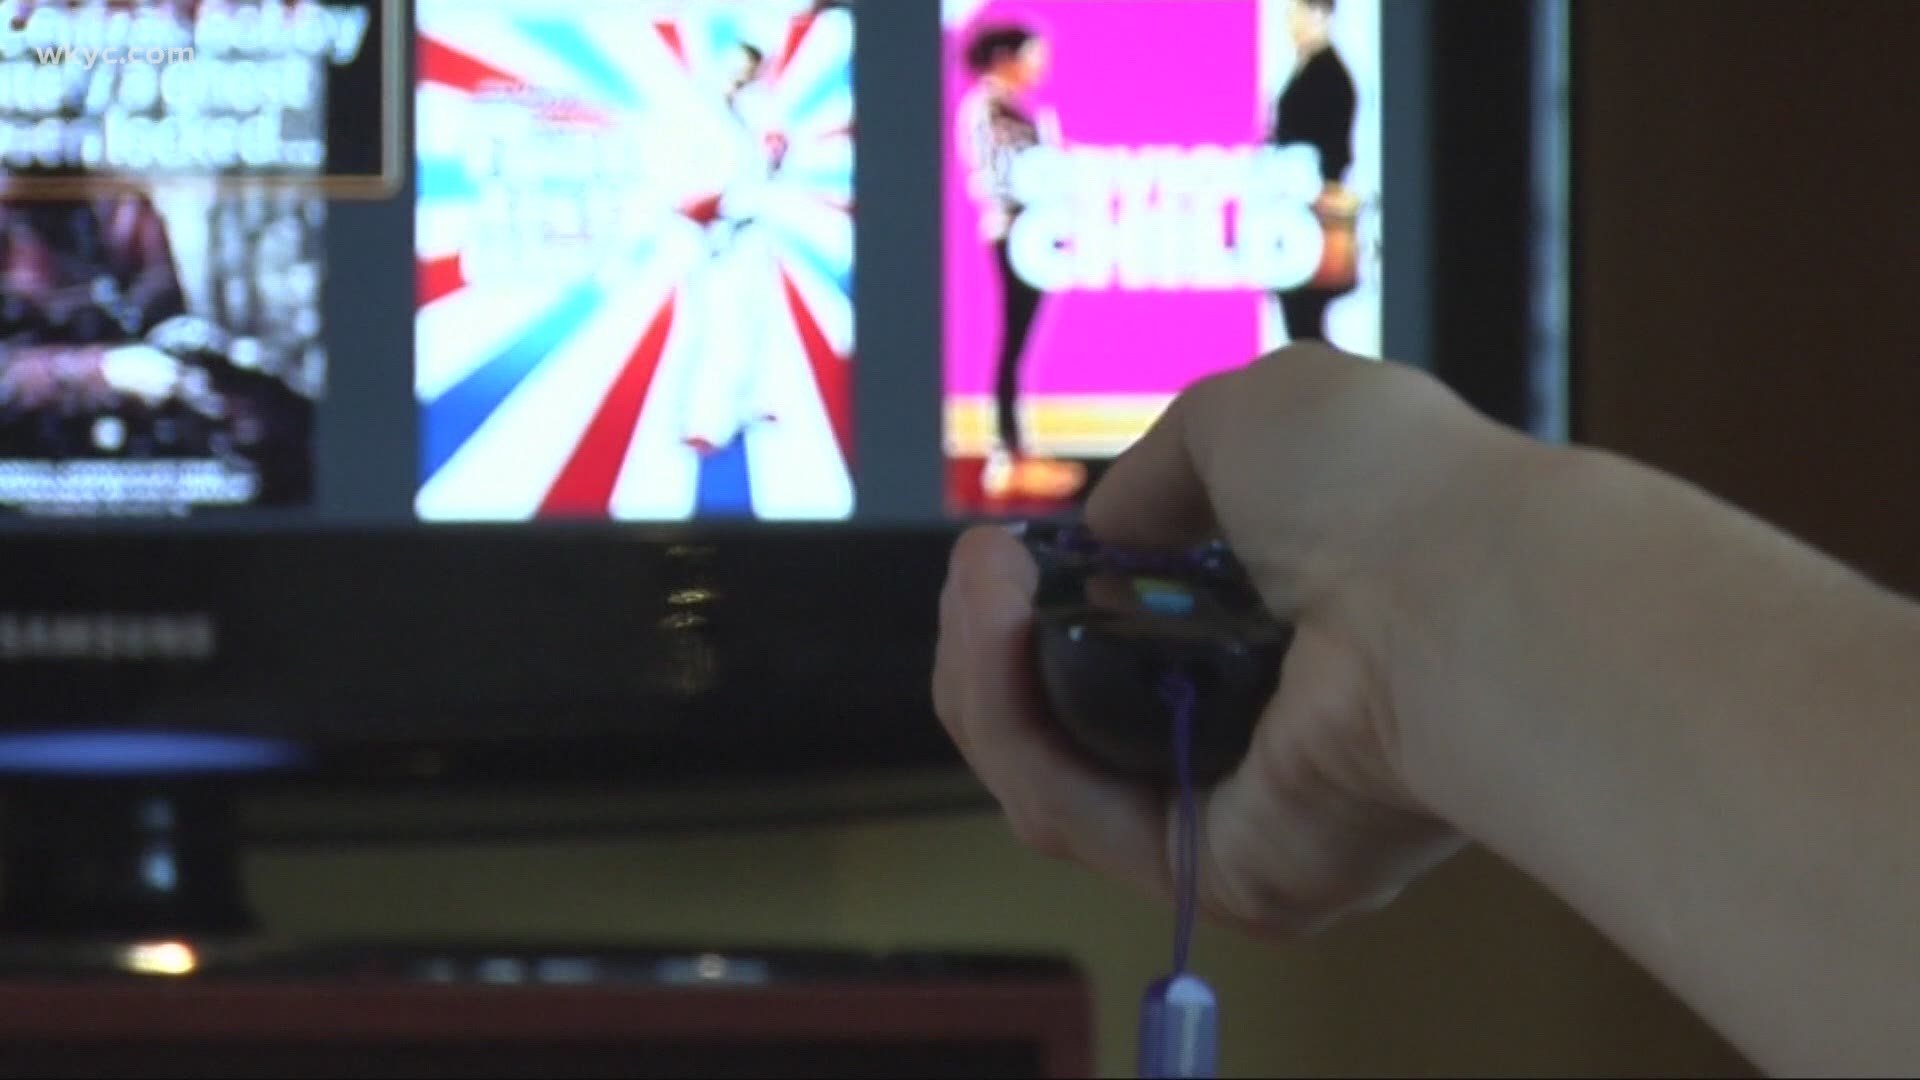 Scammers are tuning into streaming services as their popularity rises. Danielle Serino reports.